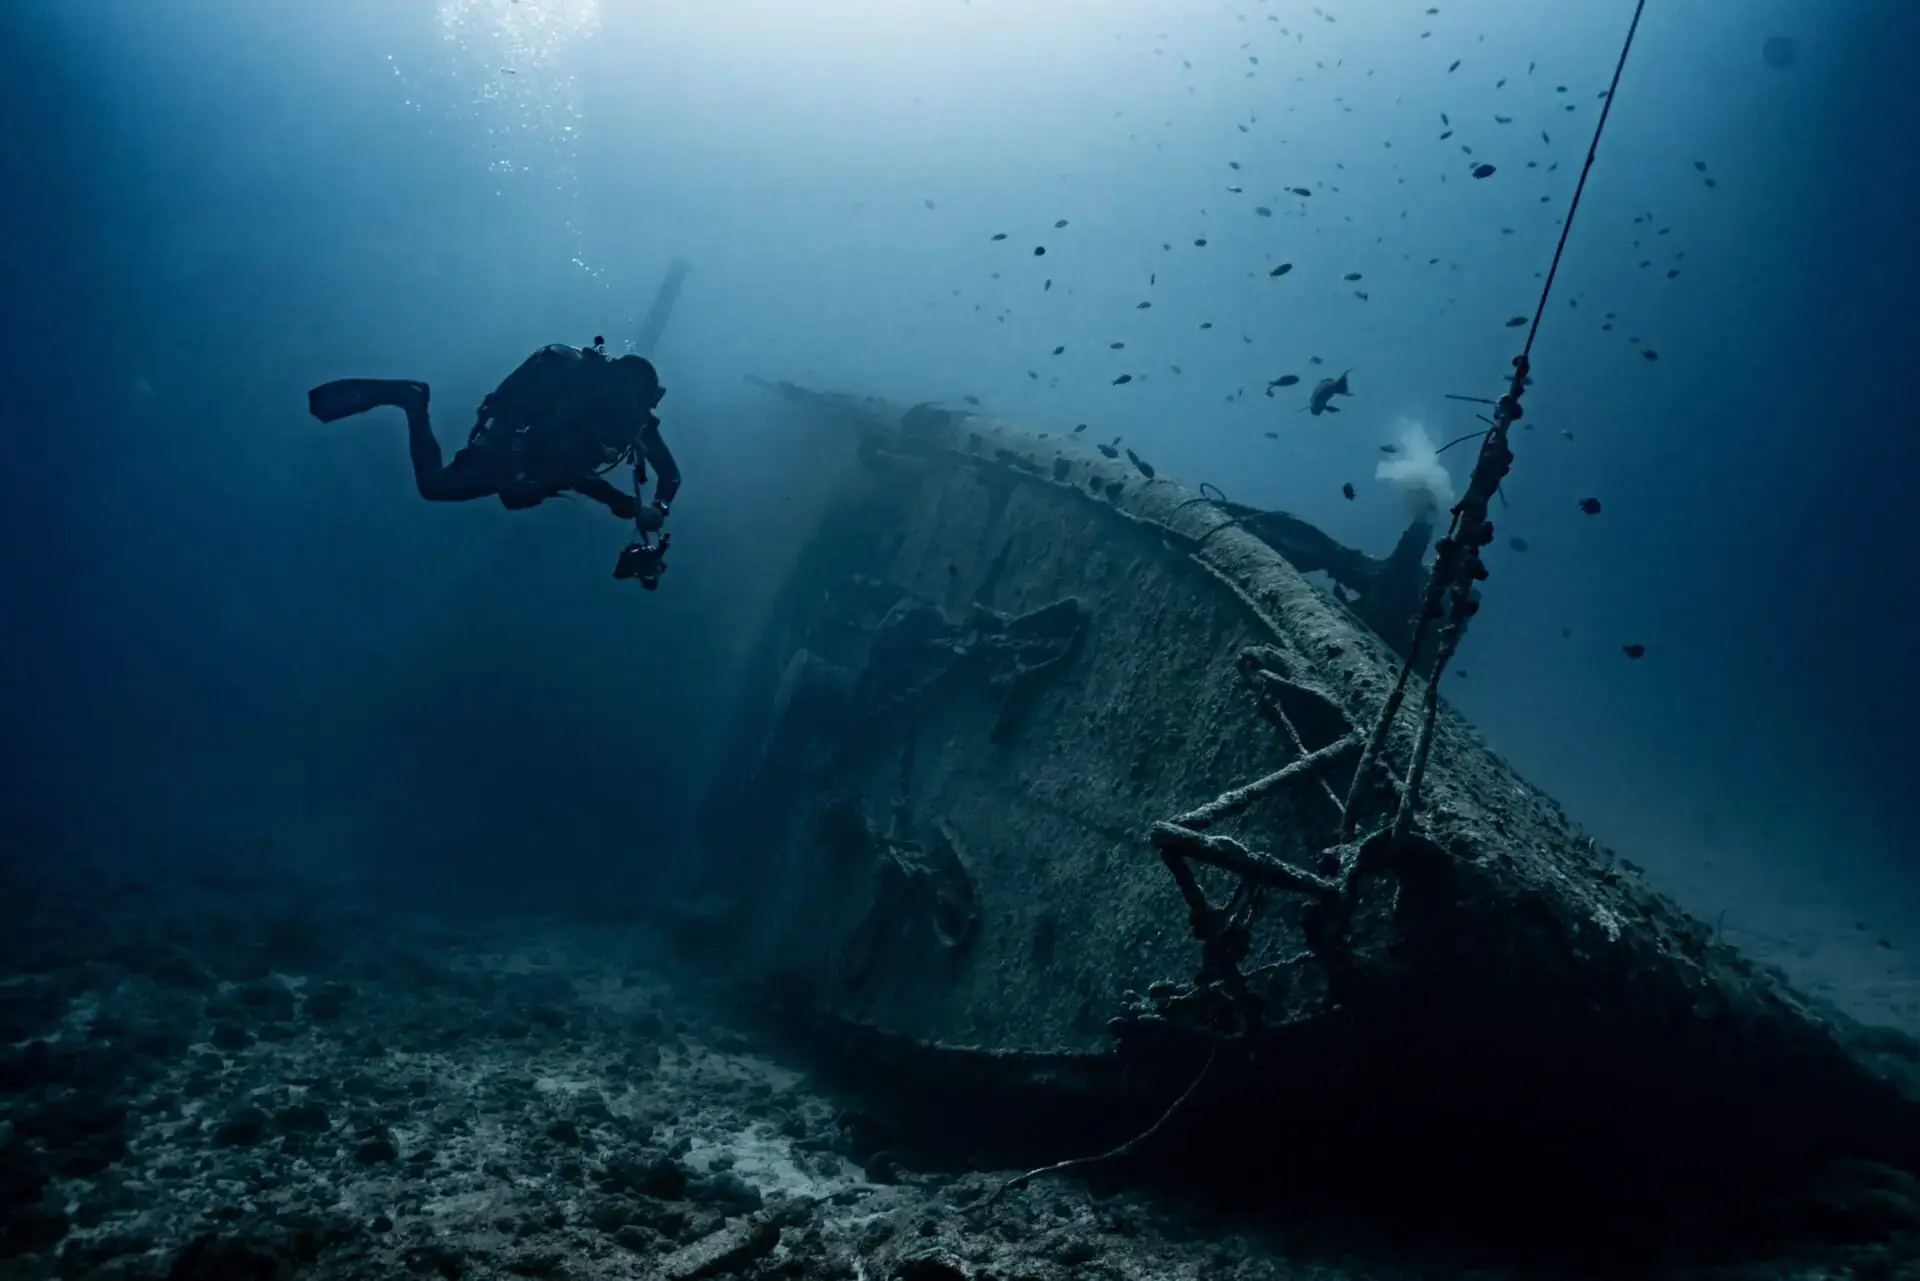 USS Emmons wreck diving in Okinawa